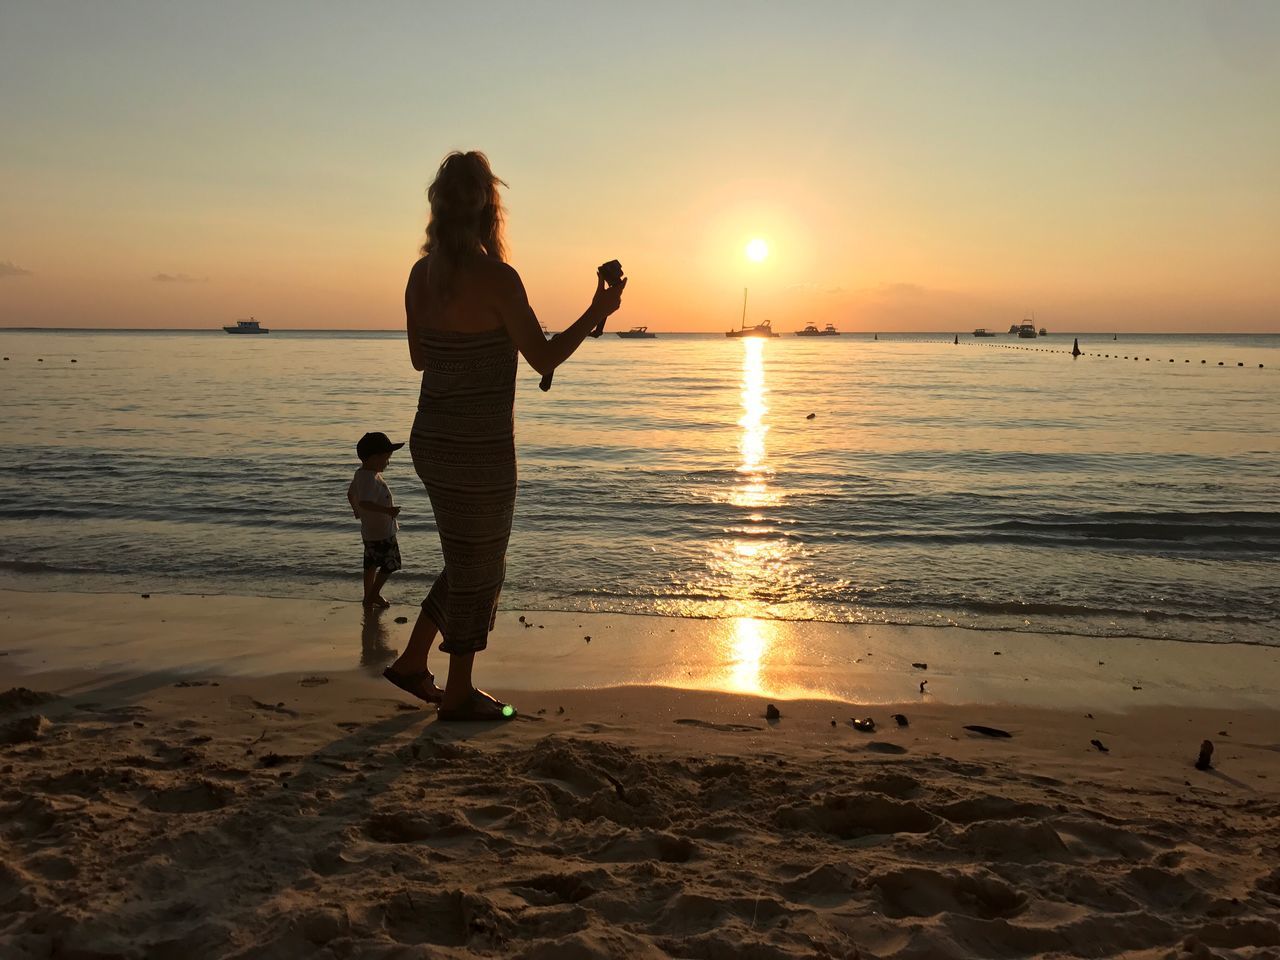 sunset, beach, sand, vacations, sea, real people, nature, two people, shore, scenics, leisure activity, beauty in nature, full length, water, sun, standing, reflection, silhouette, tourism, sky, enjoyment, lifestyles, outdoors, horizon over water, tranquility, women, togetherness, men, wave, people